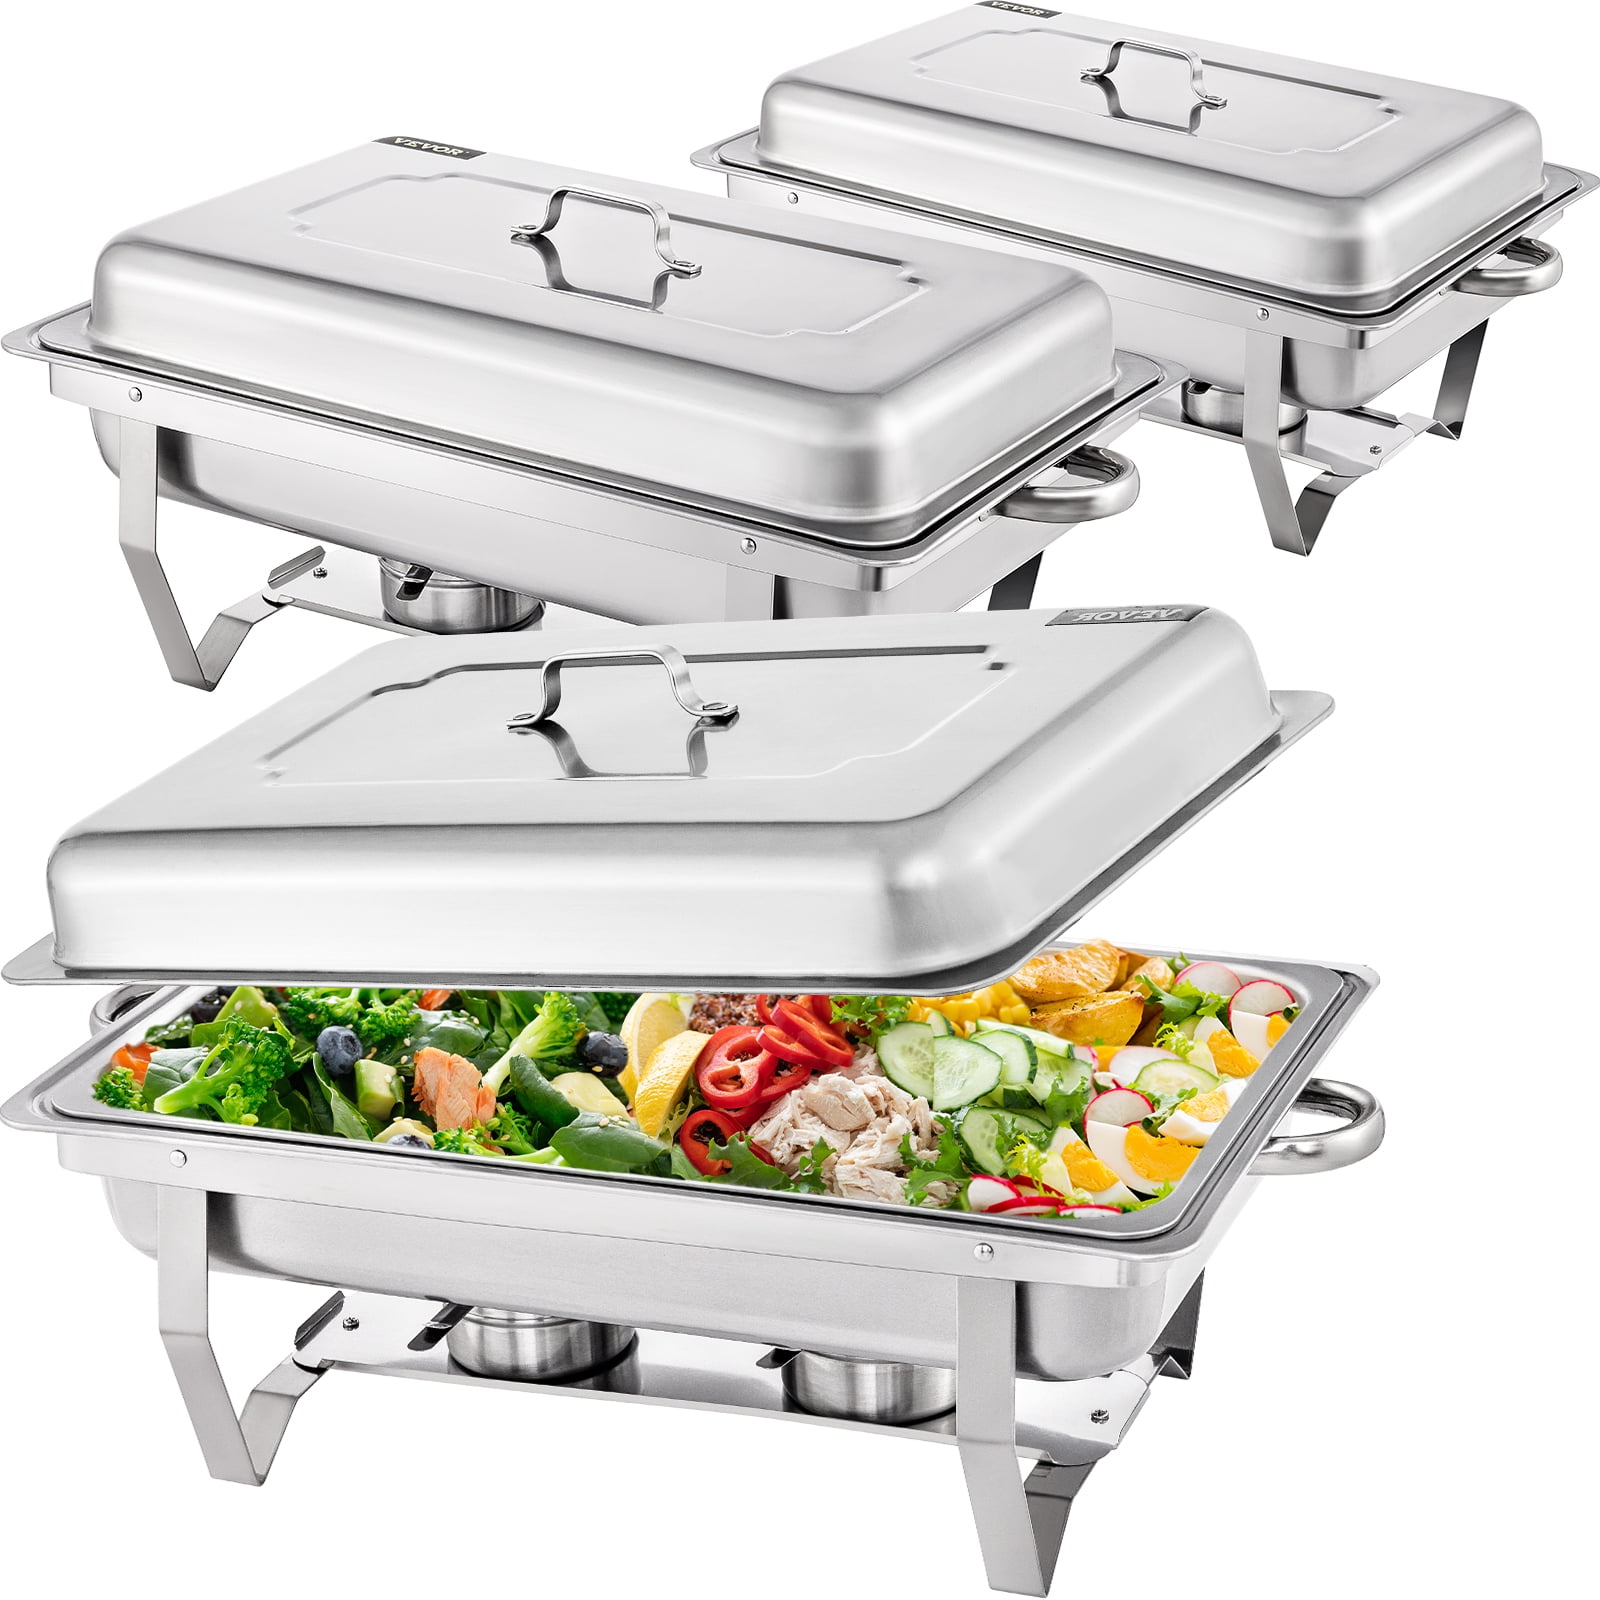 32 x 26 x 6.5cm disposable catering oven tray Party & Paper Solutions 3 x SQUARE ALUMINIUM FOIL ROASTING DISH 